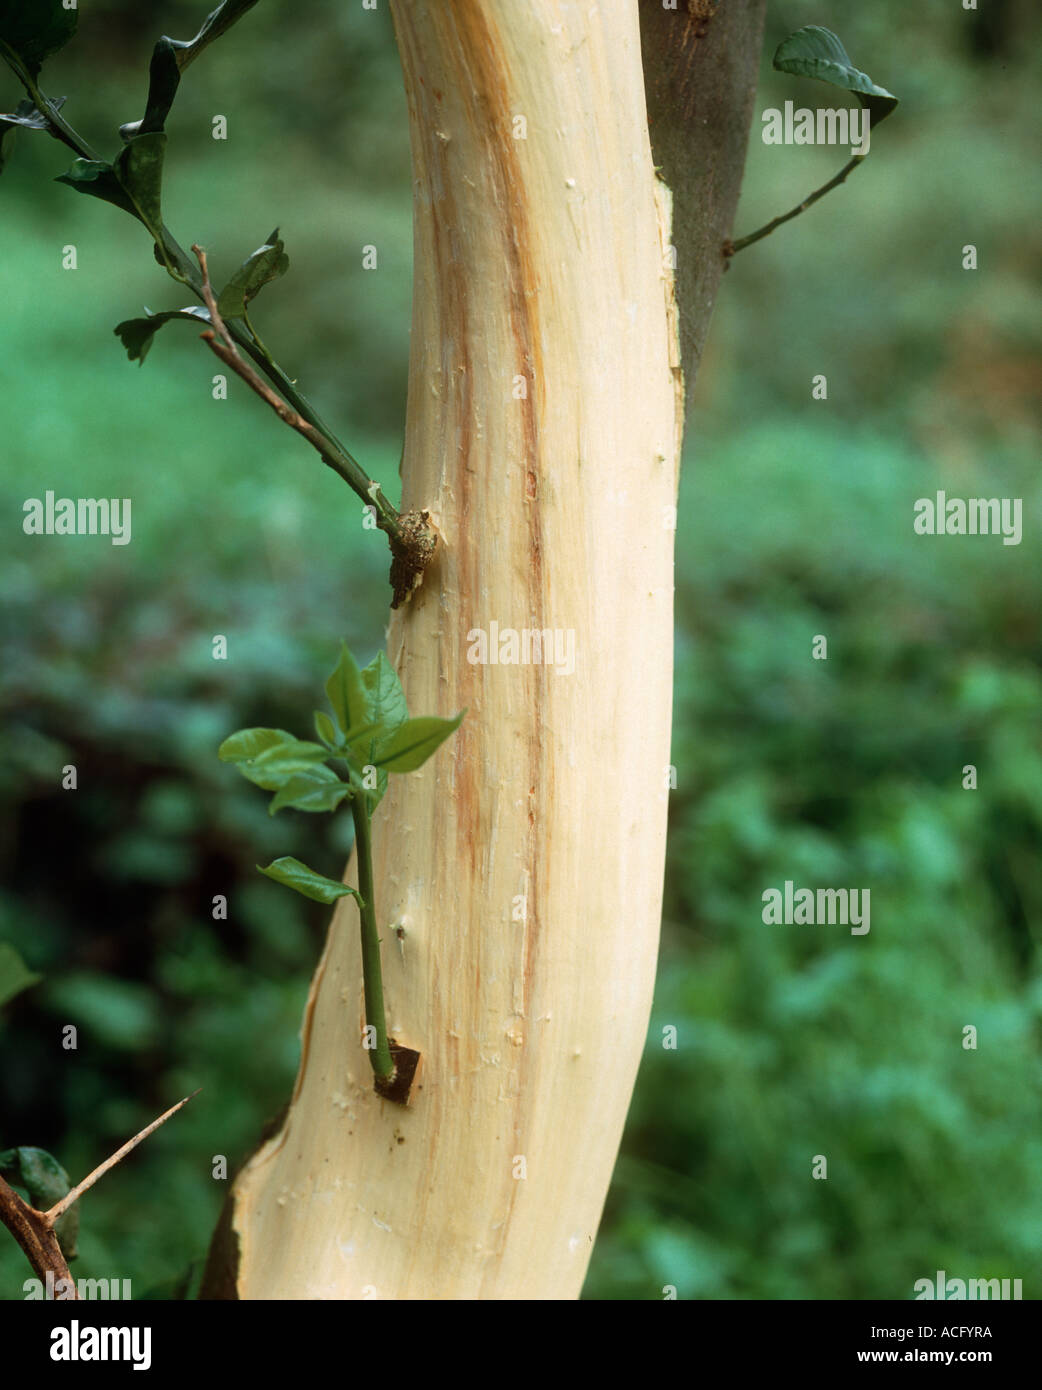 Mal secco Phoma tracheiphila browning of the vascular tissue in a lemon tree trunk Stock Photo